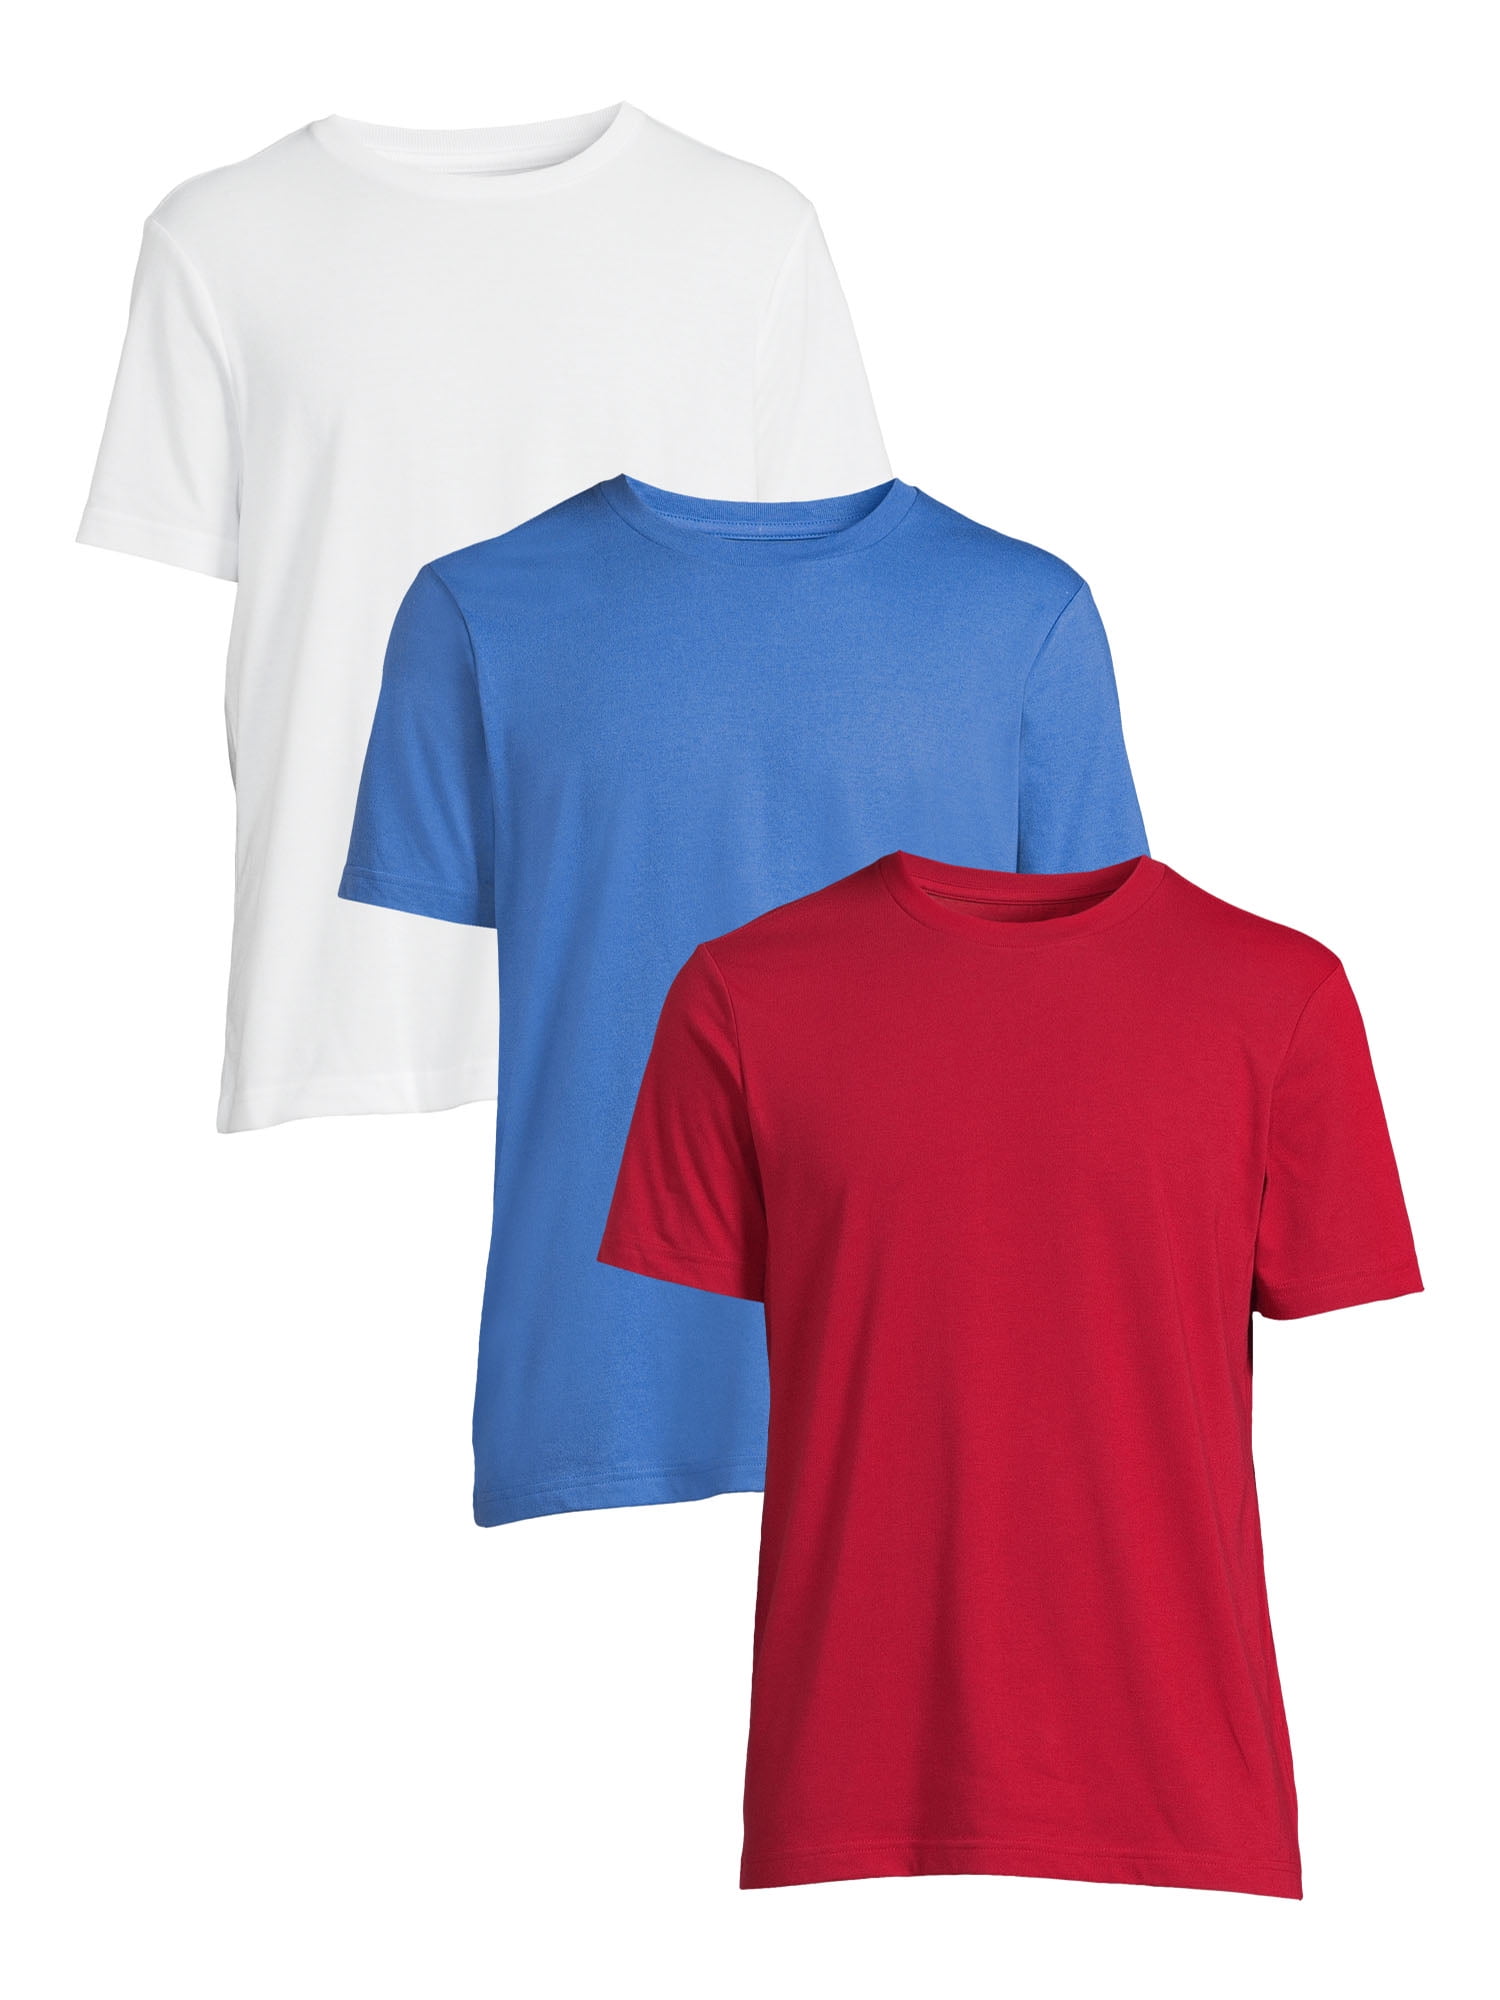 George Men's and Big Men's Short Sleeve Crew Tee, 3-Pack, Sizes XS-3XL ...